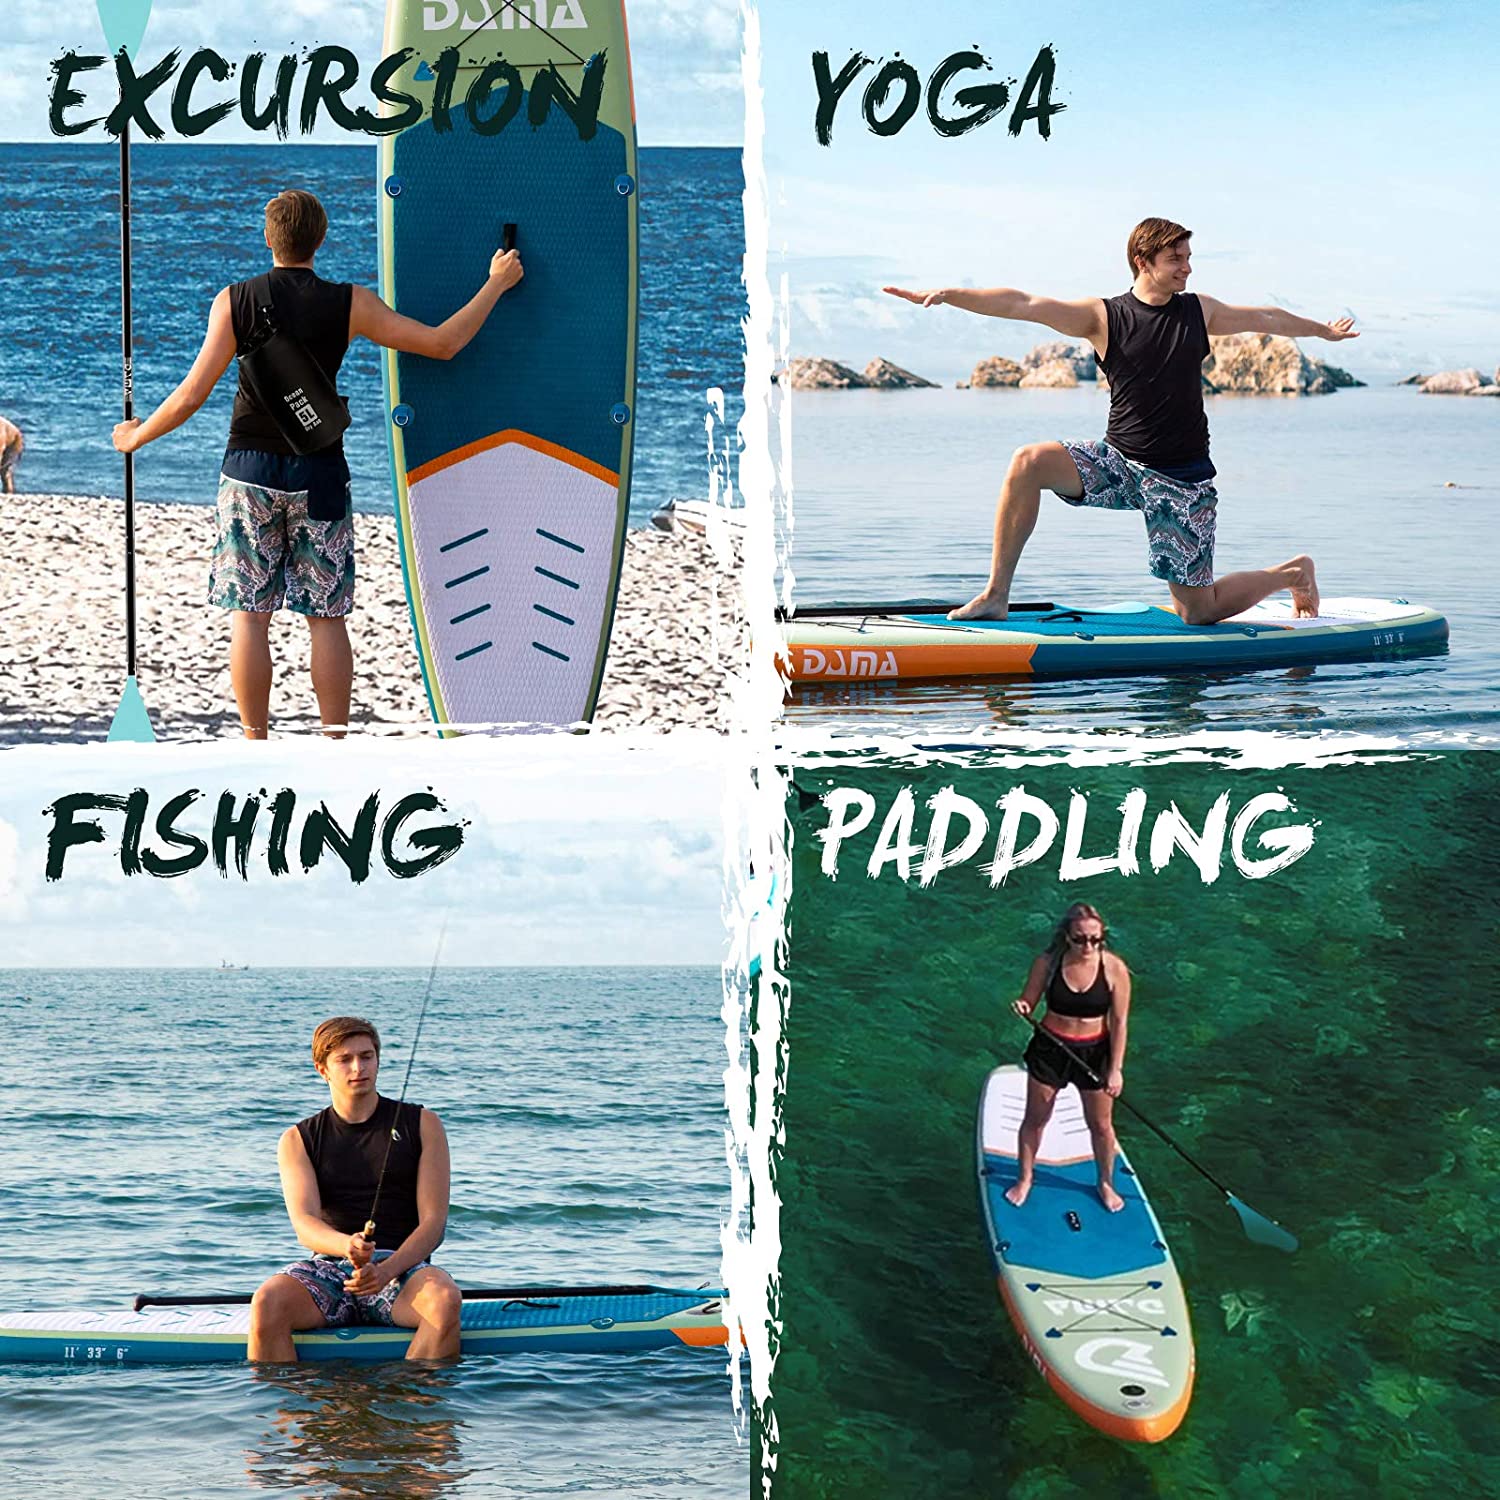 DAMA Inflatable Stand Up Paddle Board, Dry Bags, Camera Seat, Floating Paddle, Hand Pump, Board Carrier, Durable & Stable for Multiple People